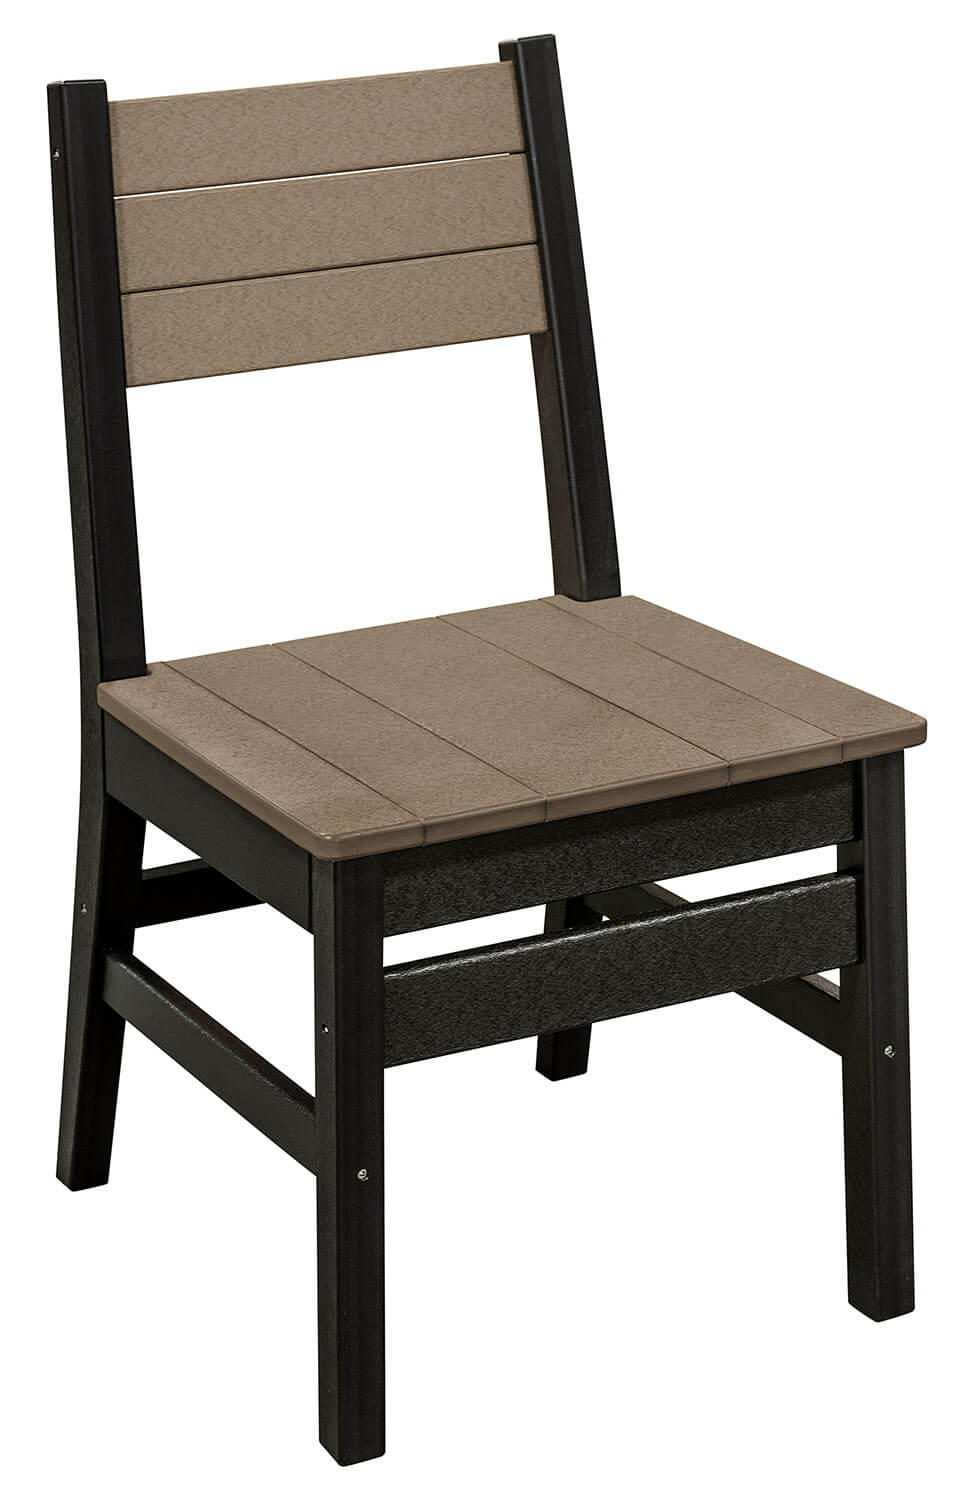 EC Woods Acadia Outdoor Poly Dining Height Chair Shown in Weathered Wood and Black